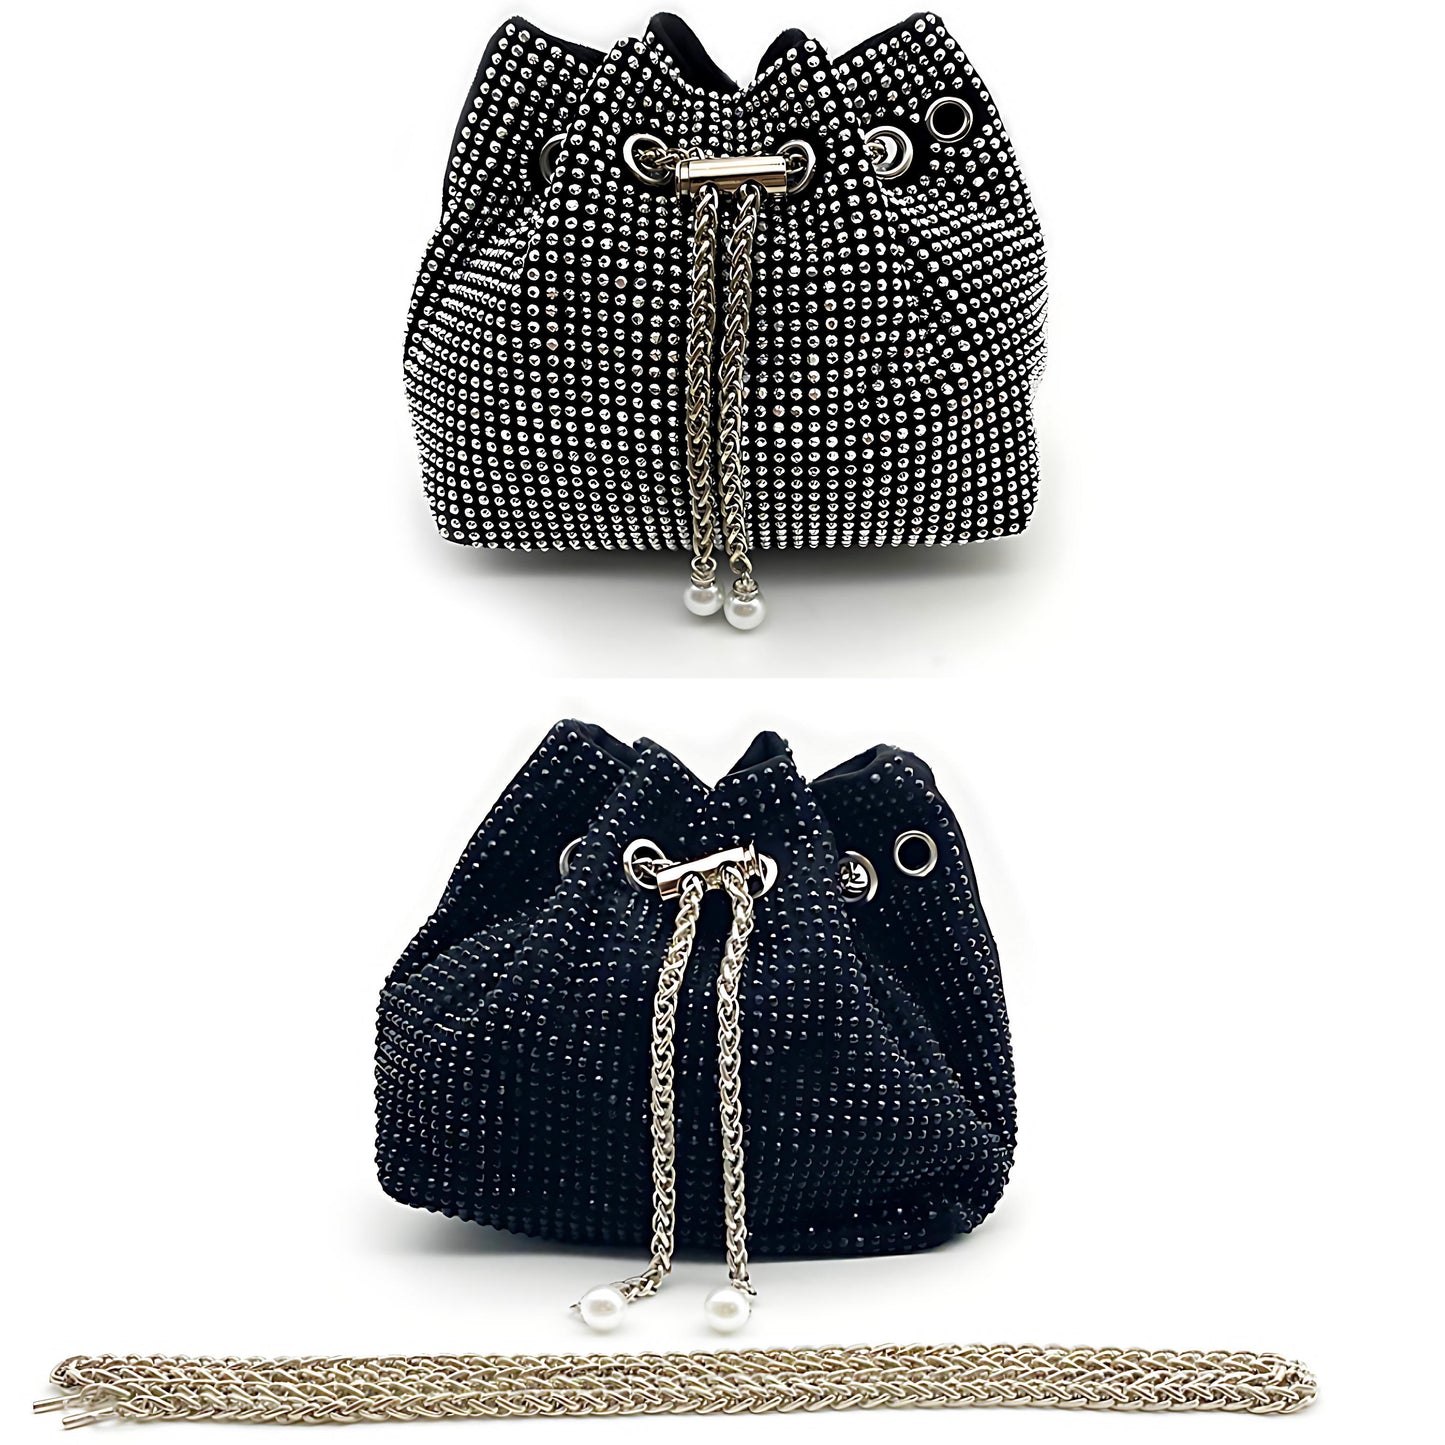 Studded Drawstring Bucket Bag with Chain Strap - 2 Colours